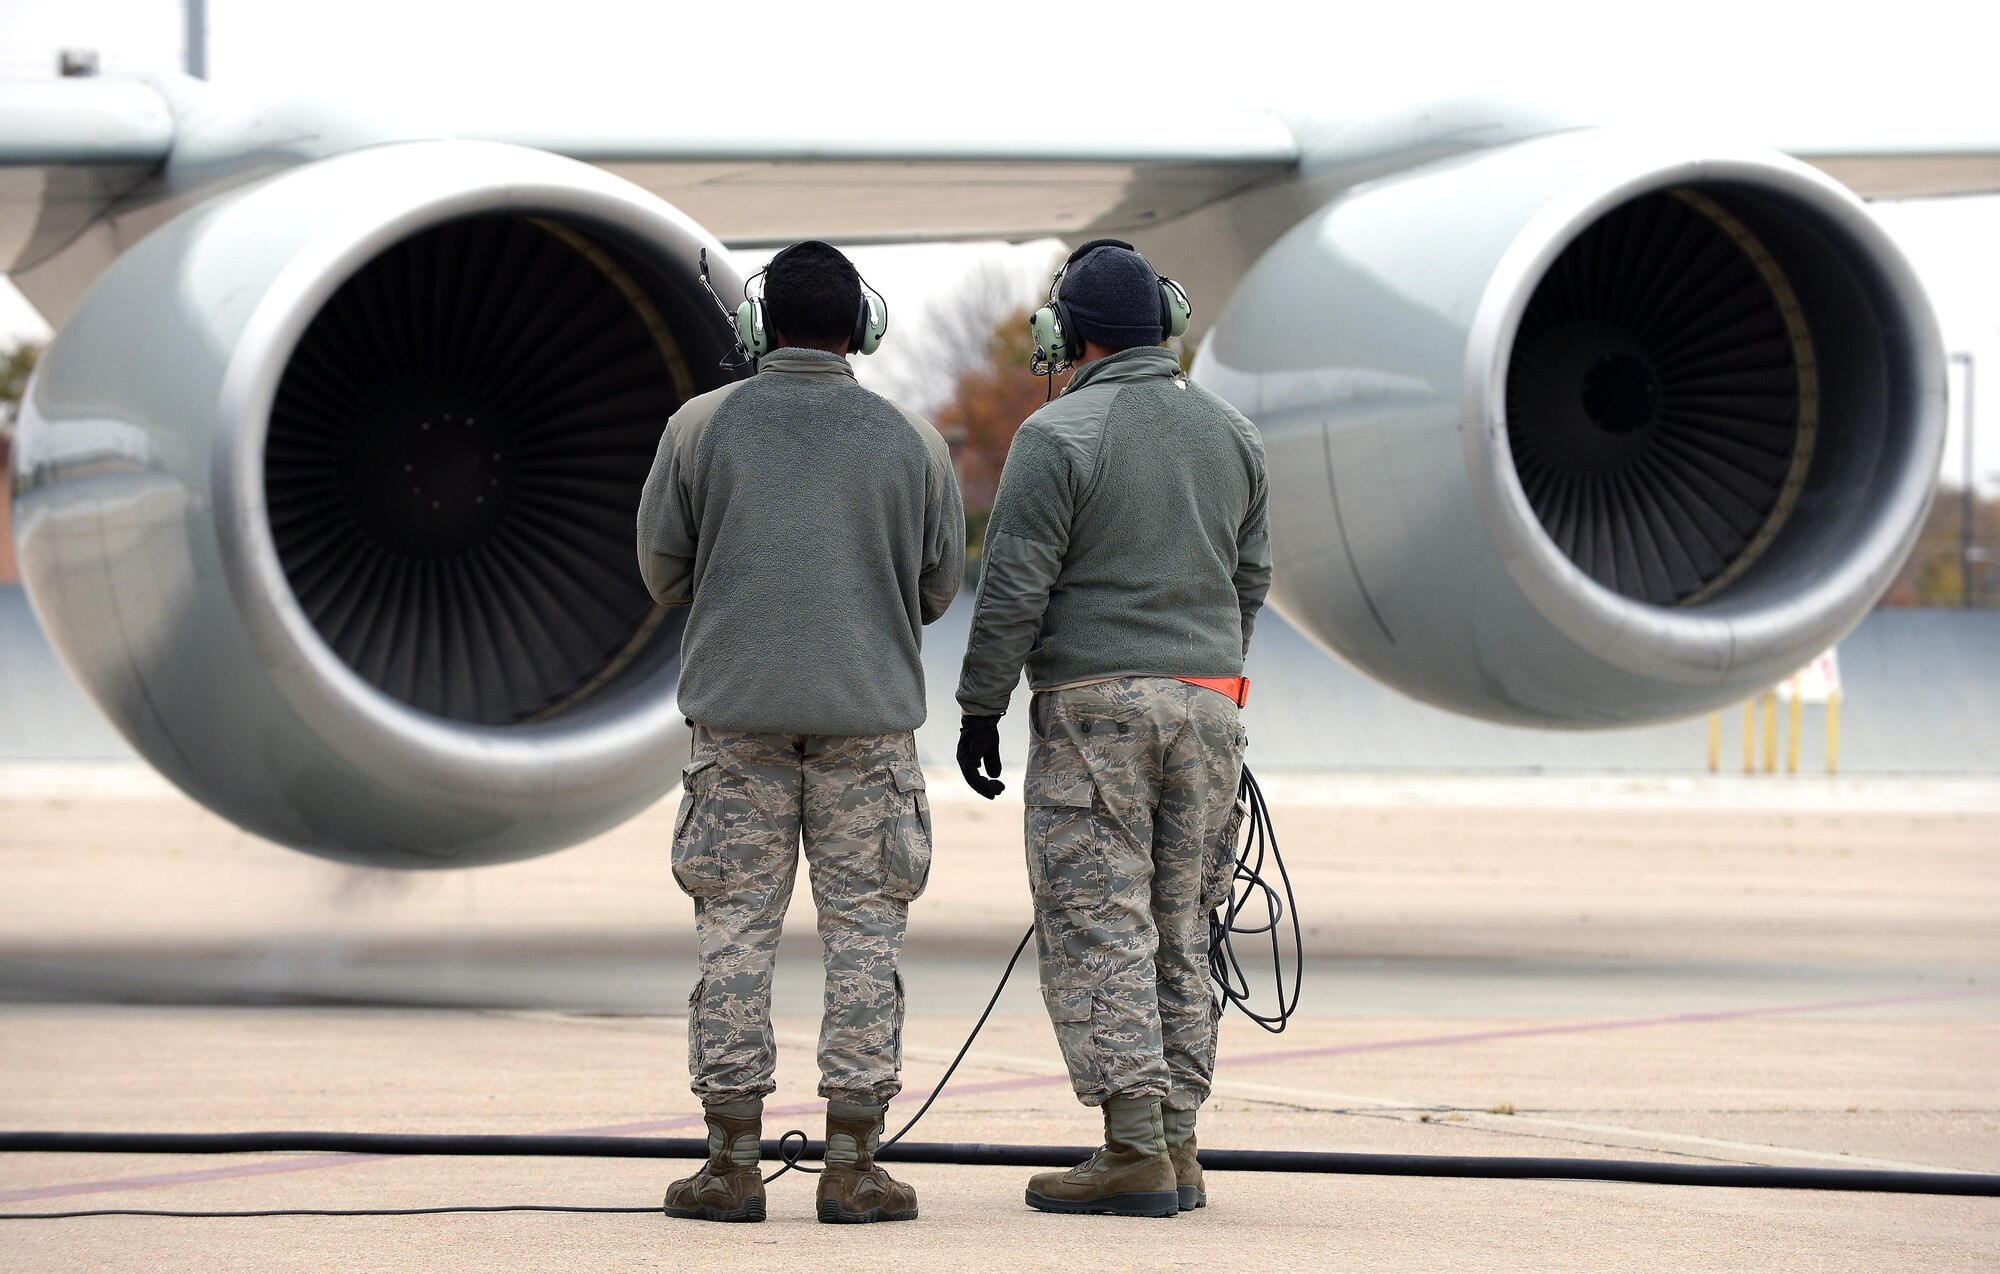 Airman First Class Kejion Madden-Vaughn (left) and Staff Sgt. Riley Neads (right), crew chiefs with the 55th Maintenance Group, observe an engine start during the launch of an RC-135 V/W Rivet Joint aircraft during Global Thunder 17, U.S. Strategic Command’s annual command post and field training exercise, Oct. 30, 2016, at Offutt Air Force Base, Neb. The exercise provided training opportunities for USSTRATCOM-tasked components, task forces, units and command posts to deter and, if necessary, defeat a military attack against the United States and to employ forces as directed by the President. (U.S. Air Force Photo by Delanie Stafford)